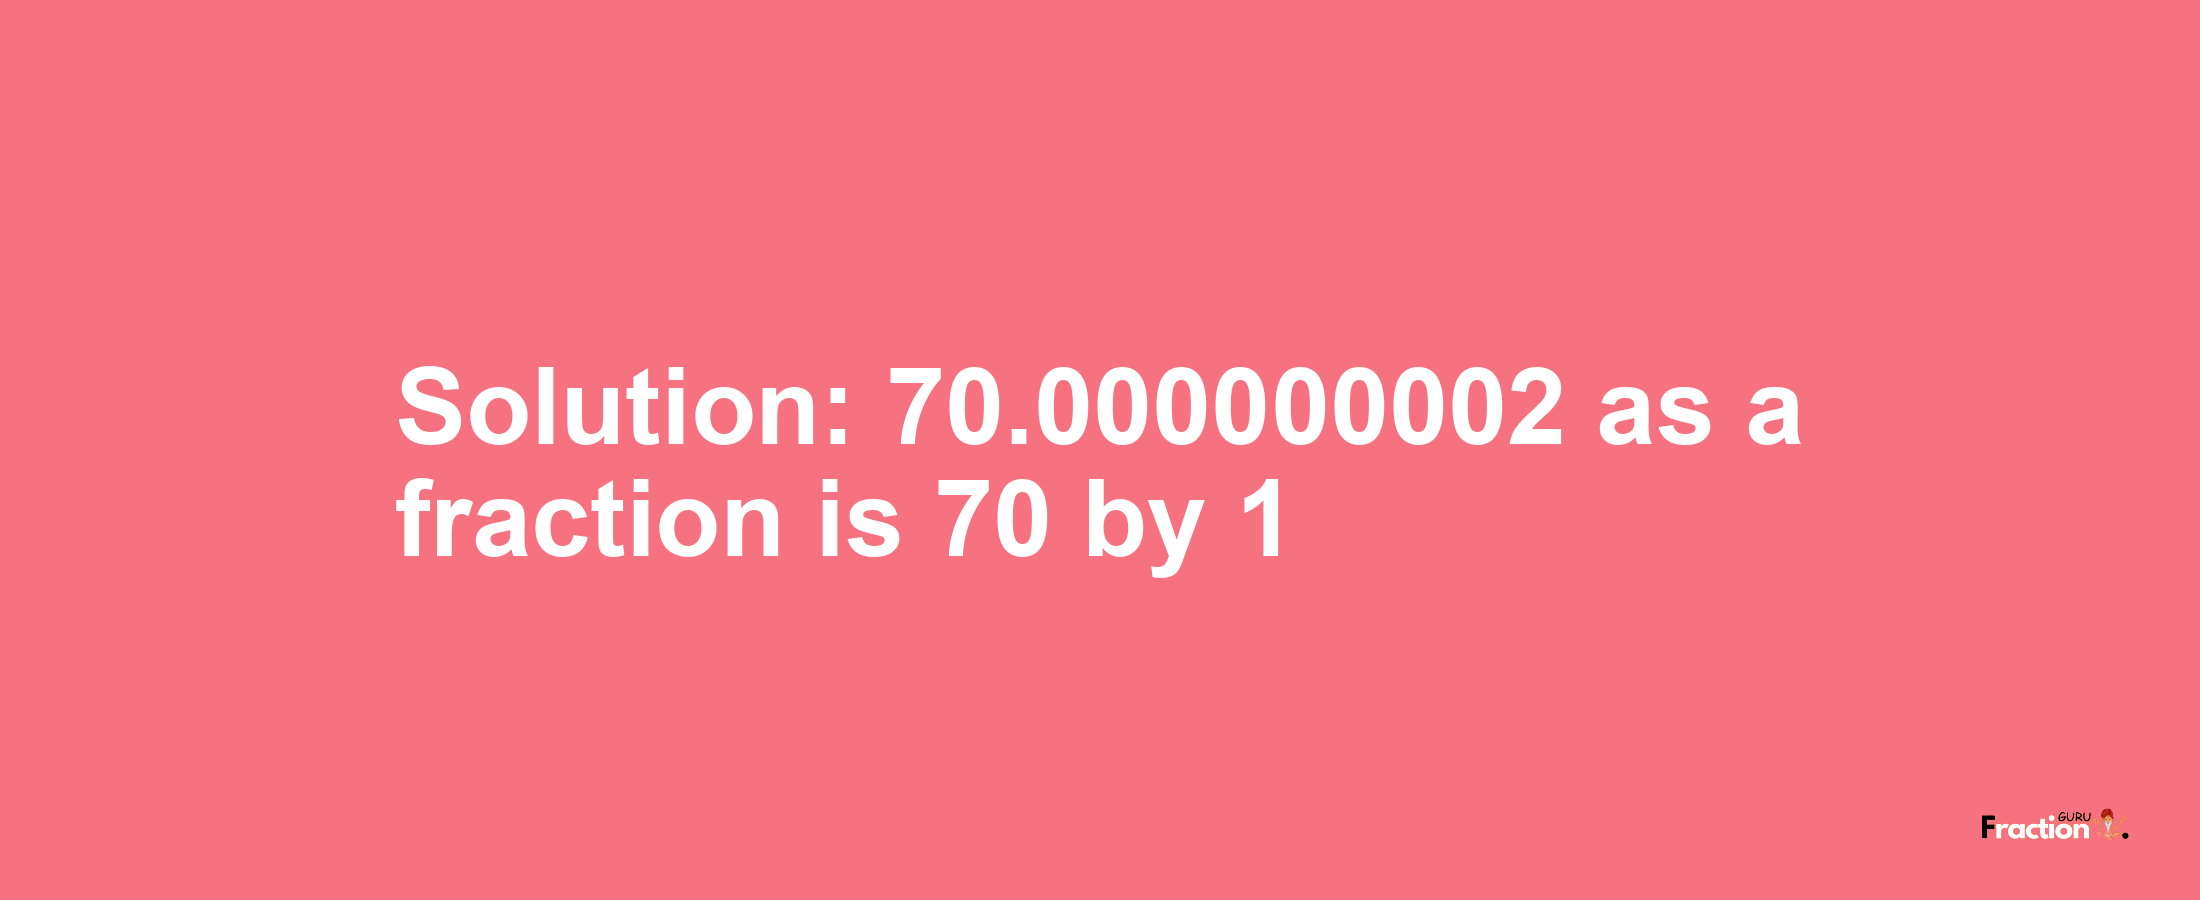 Solution:70.000000002 as a fraction is 70/1